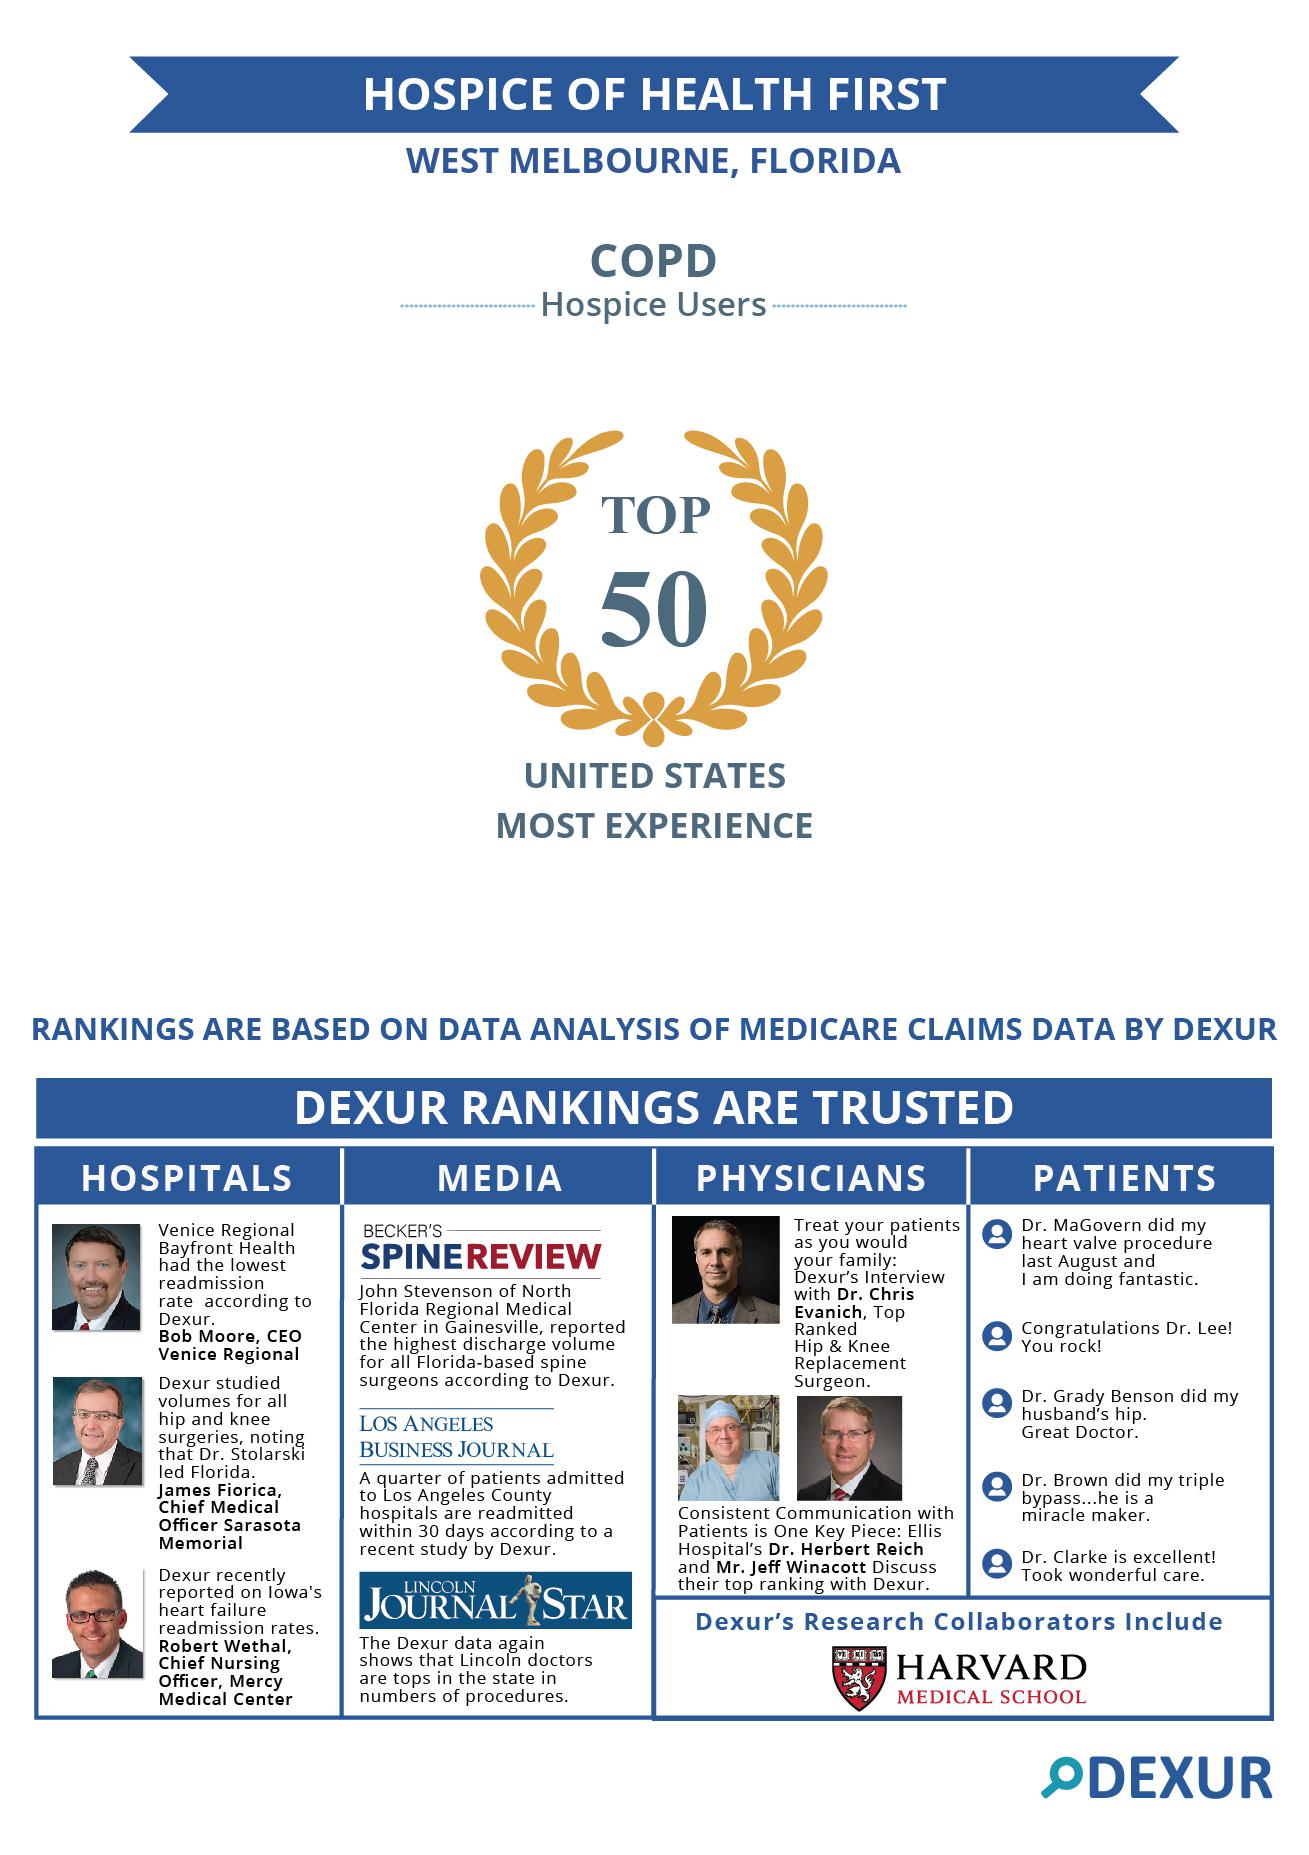 Hospice of Health First COPD Ranking